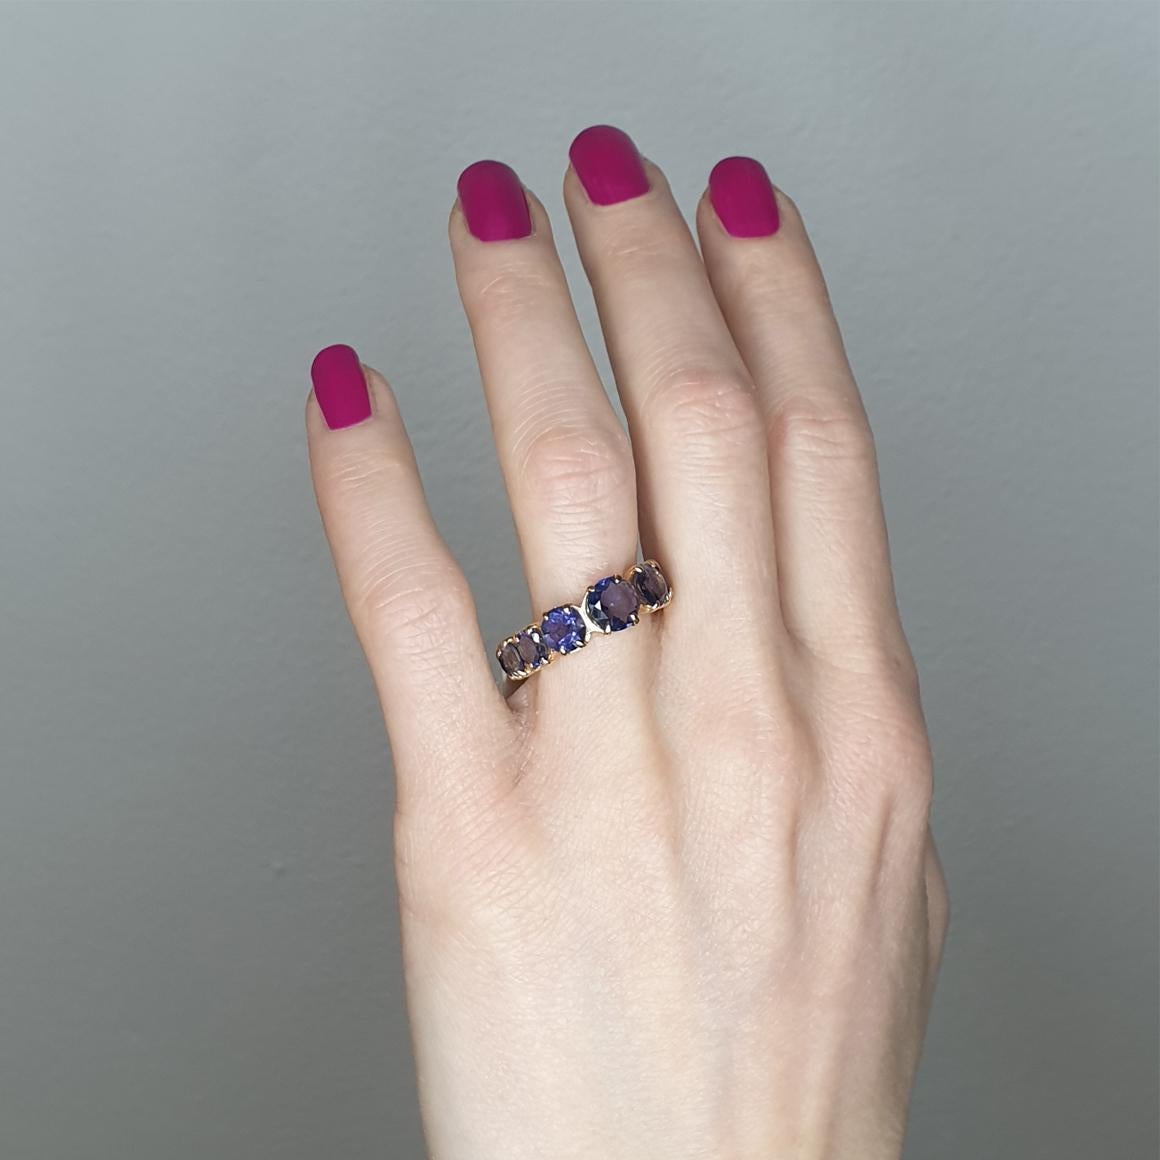 Classic and trendy ring , not only wedding ring but also a ring for every occasion with fantastic colors. Design and craftmanship made in Italy by Stanoppi Jewellery since 1948.

Classic ring in 18 karat rose gold with Iolite cut (size: 7, 6, 5,